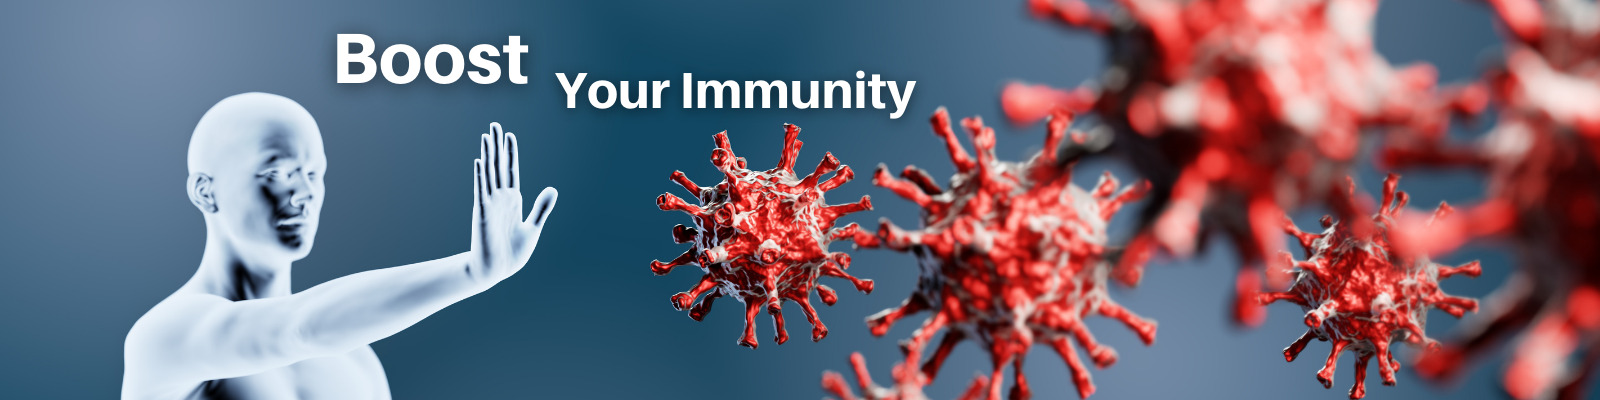 Top 10 Ways to Boost Your Immunity with Dr. Tammy Lalonde. Boost your immune system quickly and naturally with these tips and products.